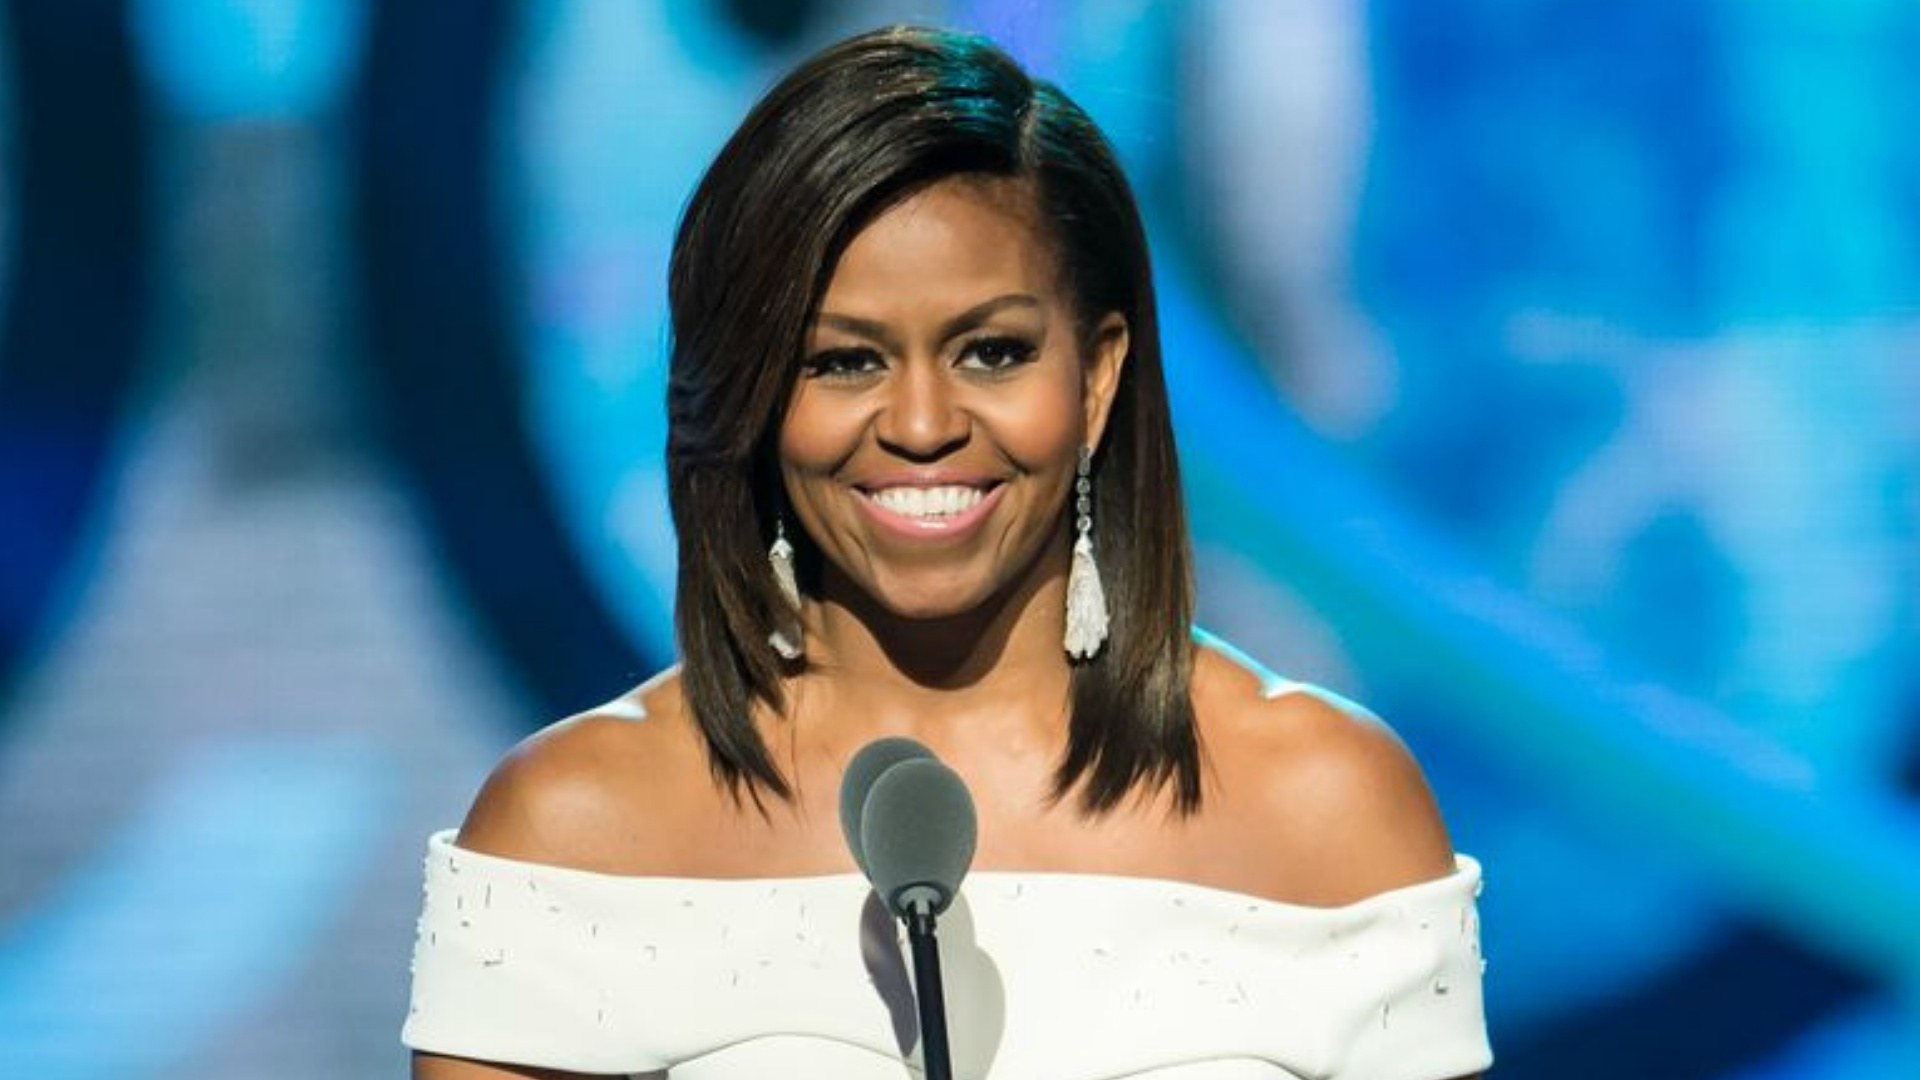 Michelle Obama: The first lady of the United States from 2009 to 2017. 1920x1080 Full HD Wallpaper.